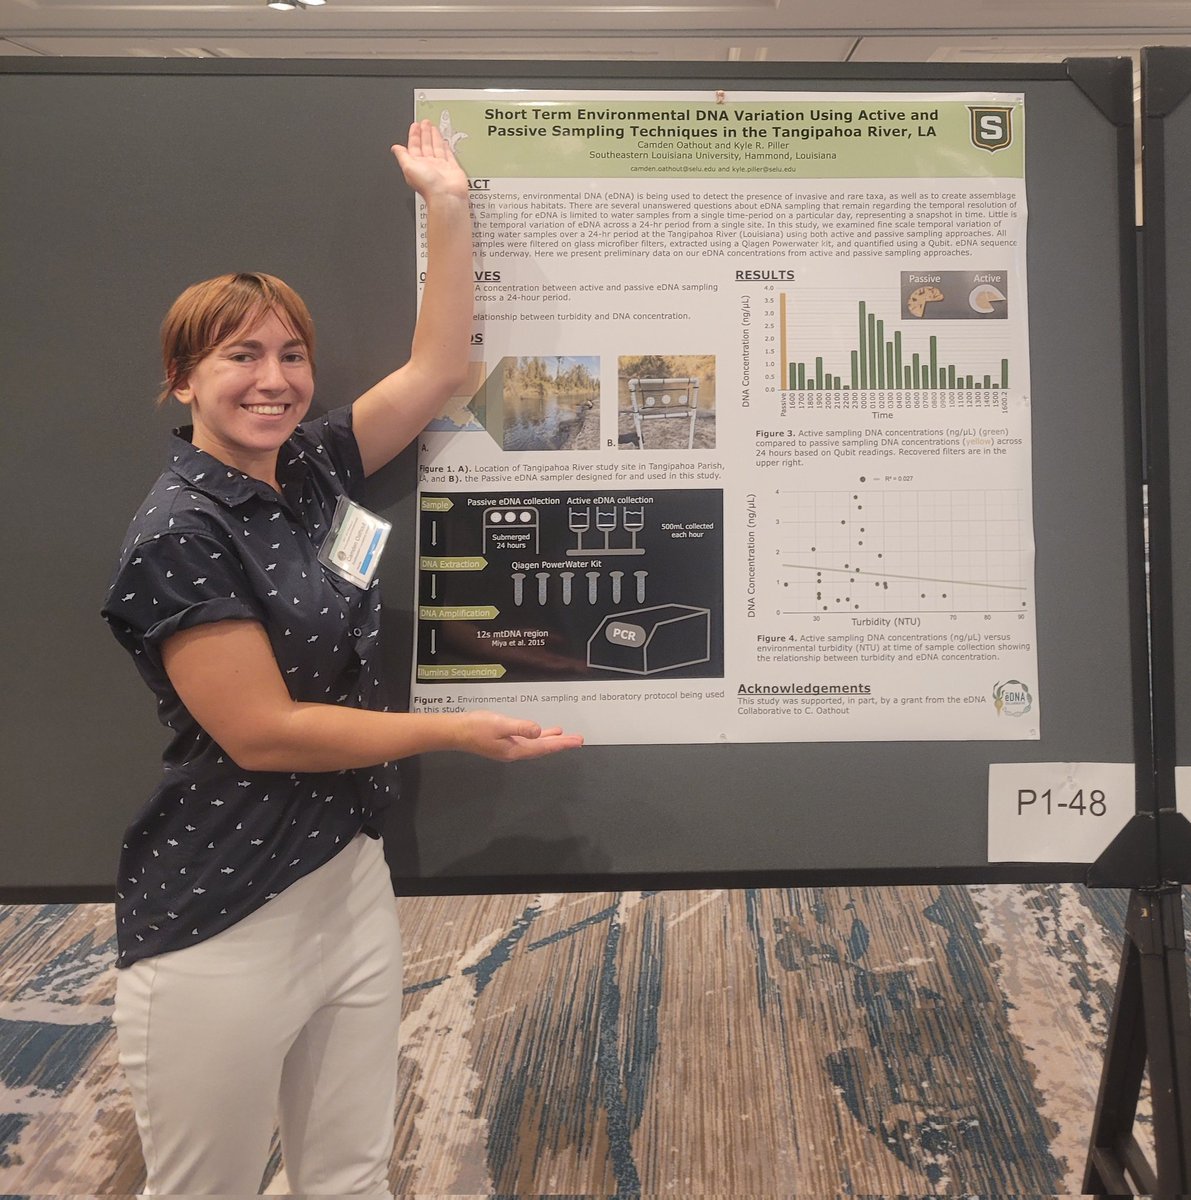 Wanna chat eDNA and fishes? Come see me at #JMIH23 tomorrow @ 4pm during the poster session!